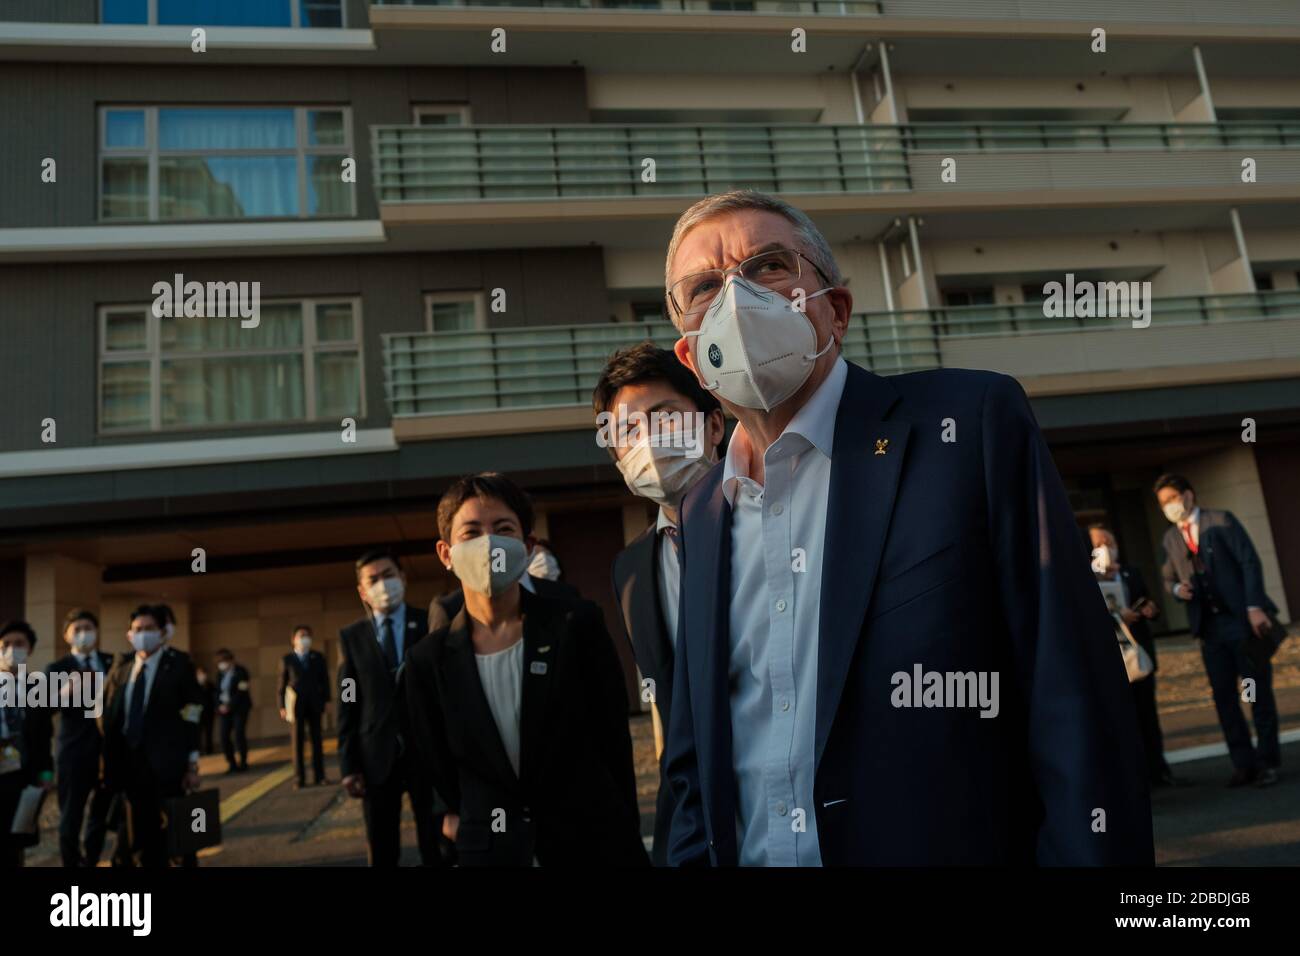 Tokyo Japan 17th Nov International Olympic Committee President Thomas Bach L Wearing A Protective Mask Talks To Journalists During A Visit Of Olympic And Paralympic Village On Downtown On November 17